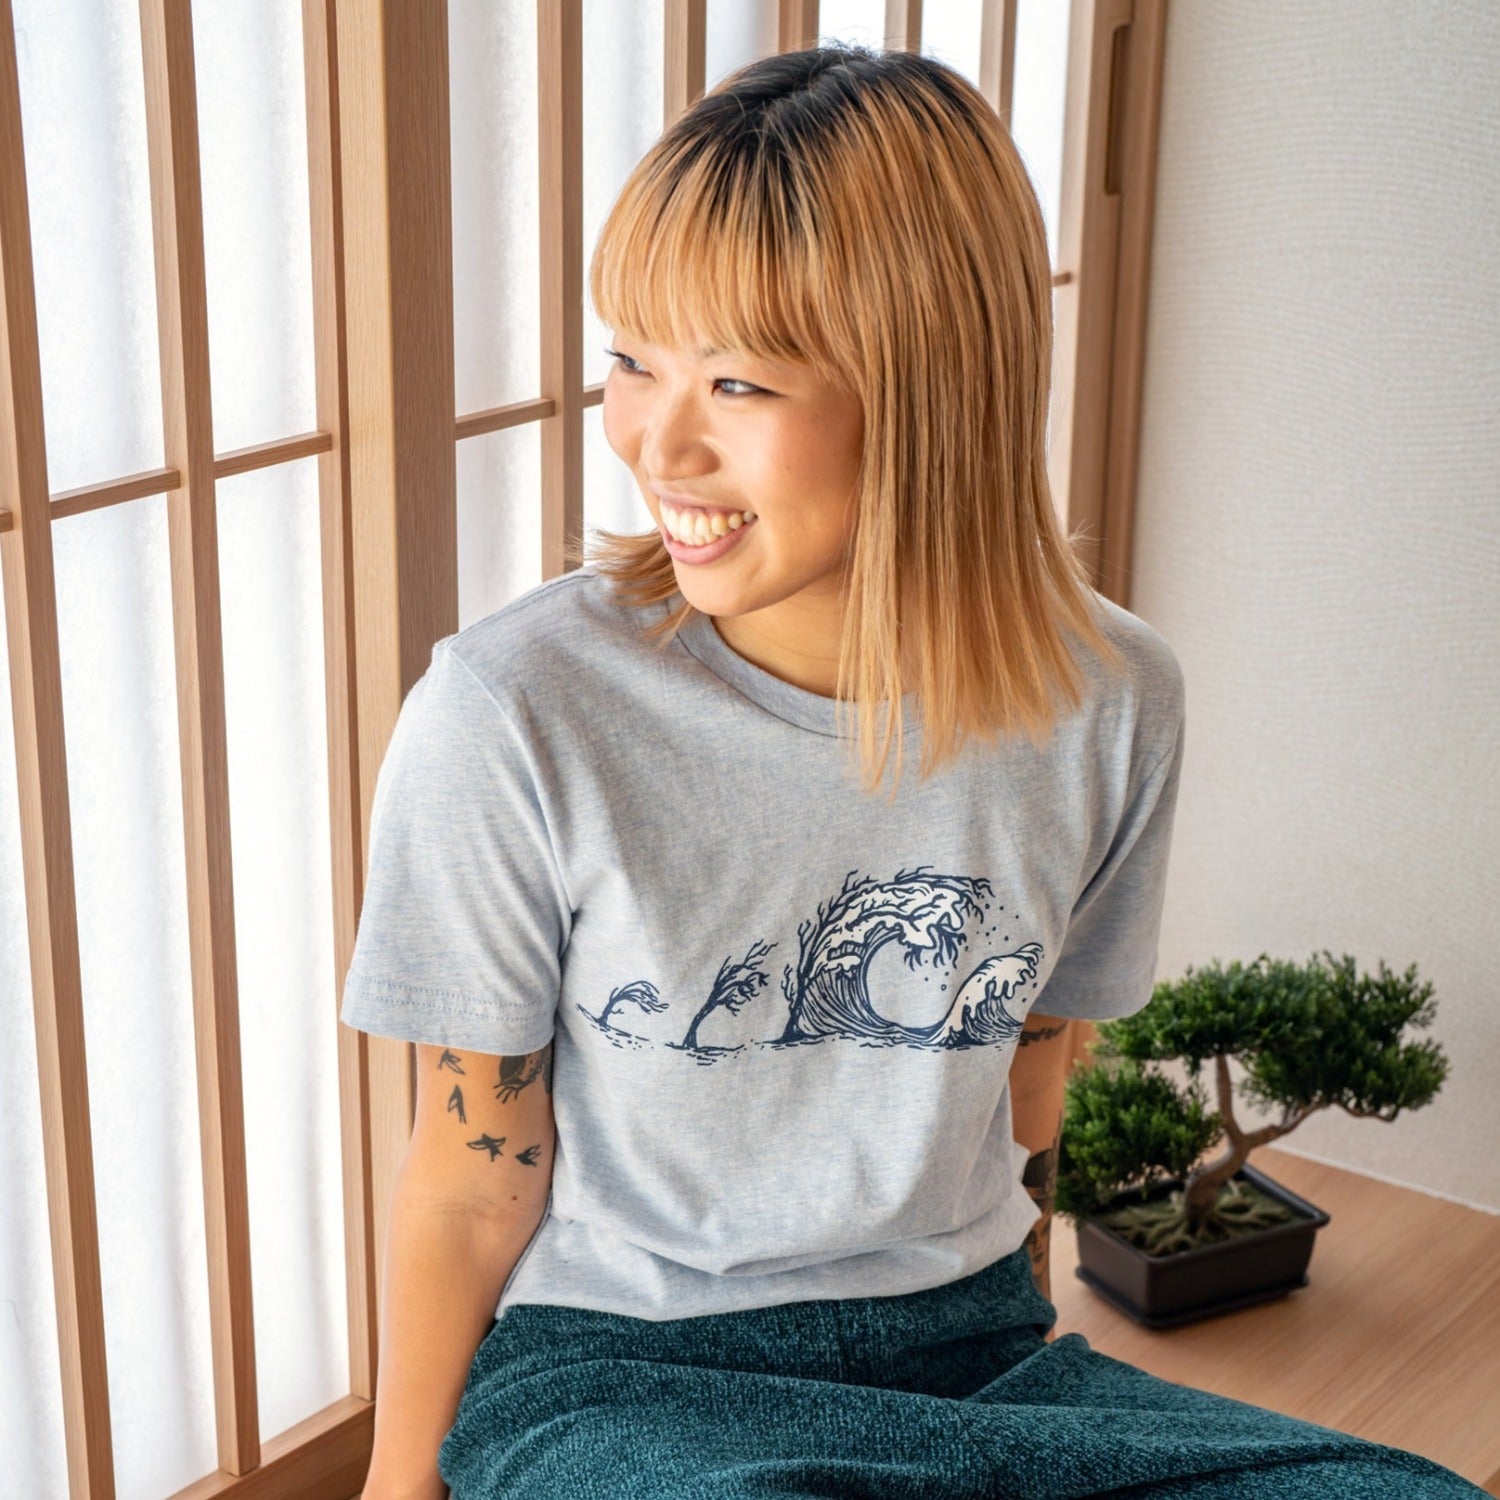 Girl looking to the side while wearing light blue tee with trees turning to waves across the chest.